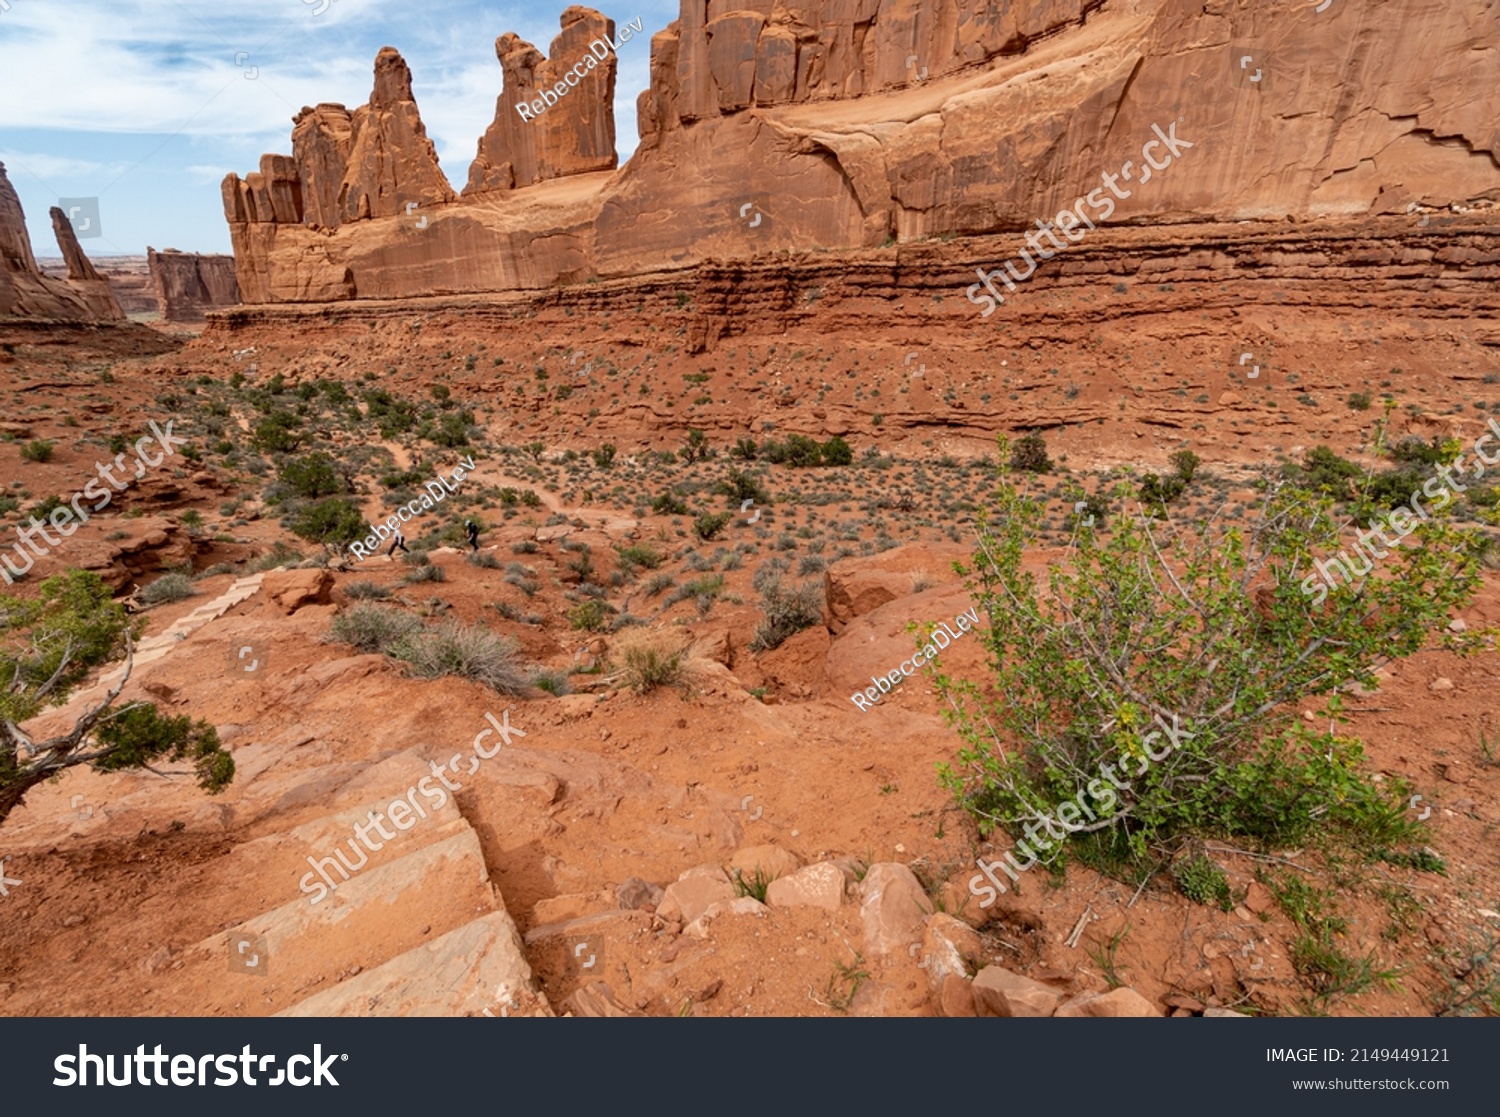 Arches National Park at Midday - Arches has many arches including the famous Delicate Arch, the Window Arch, the Double Arch and other features such as Tower of Babel, Turret Arch, and the Courthouse  #2149449121